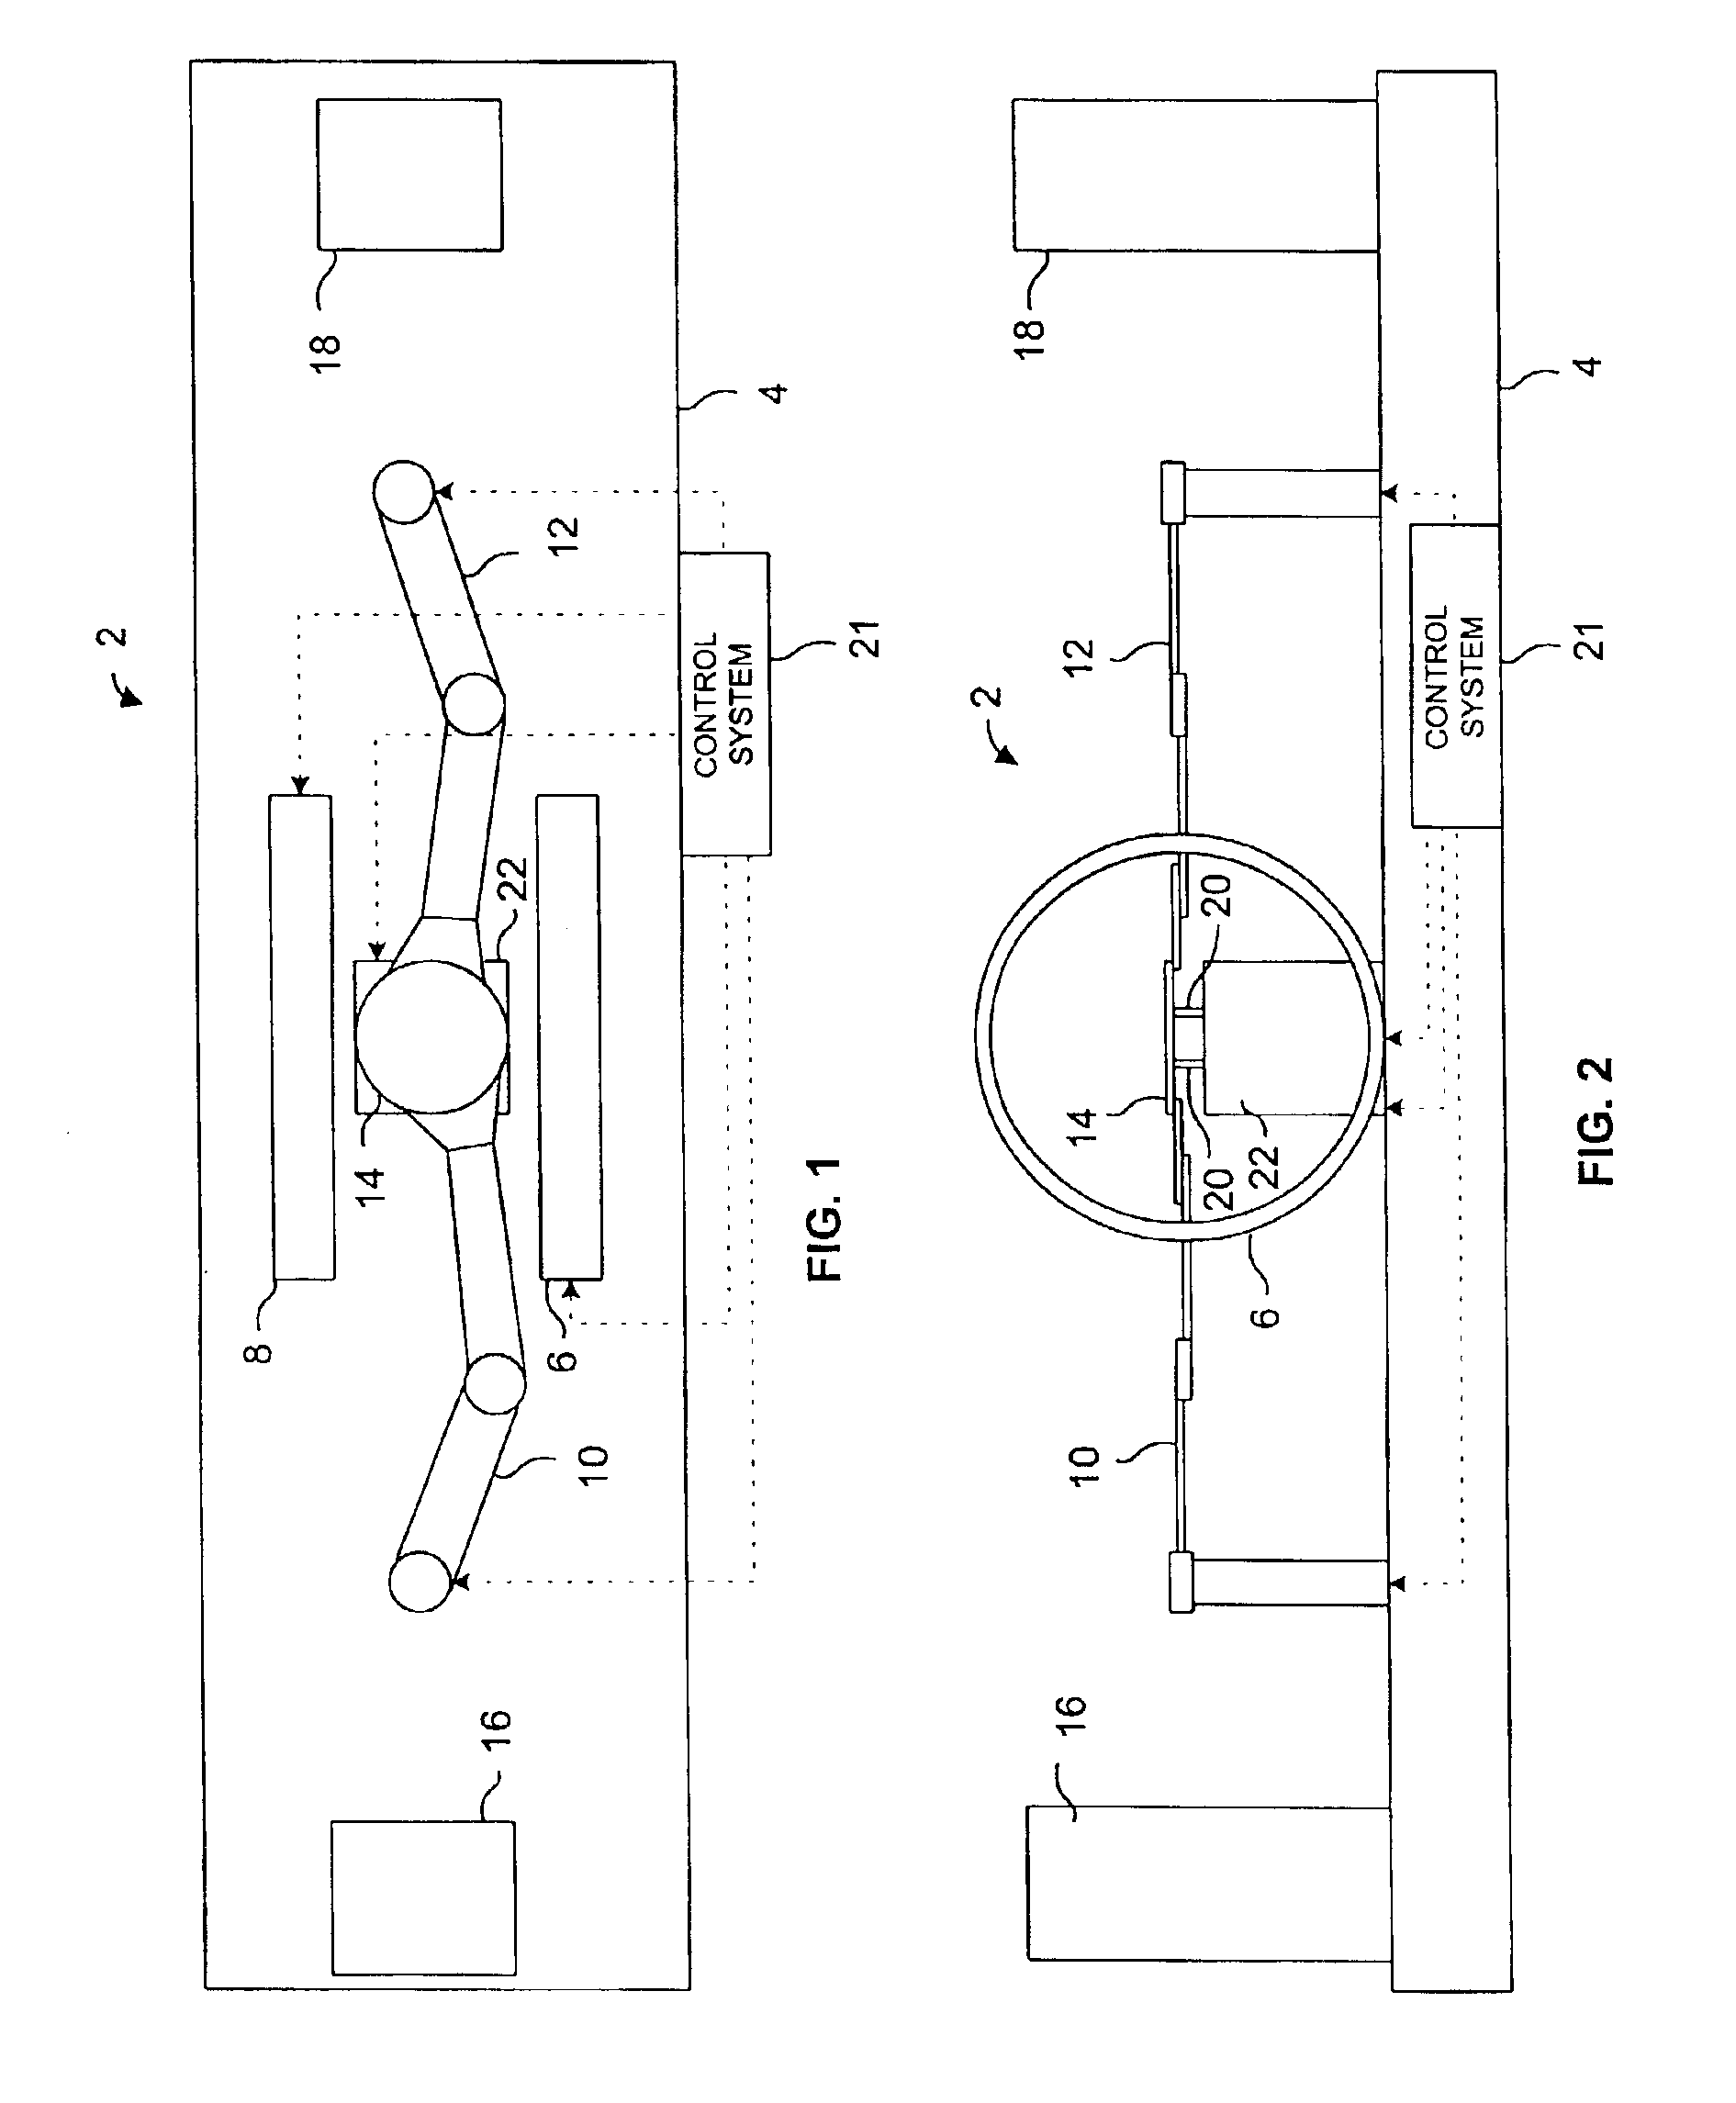 Single substrate annealing of magnetoresistive structure